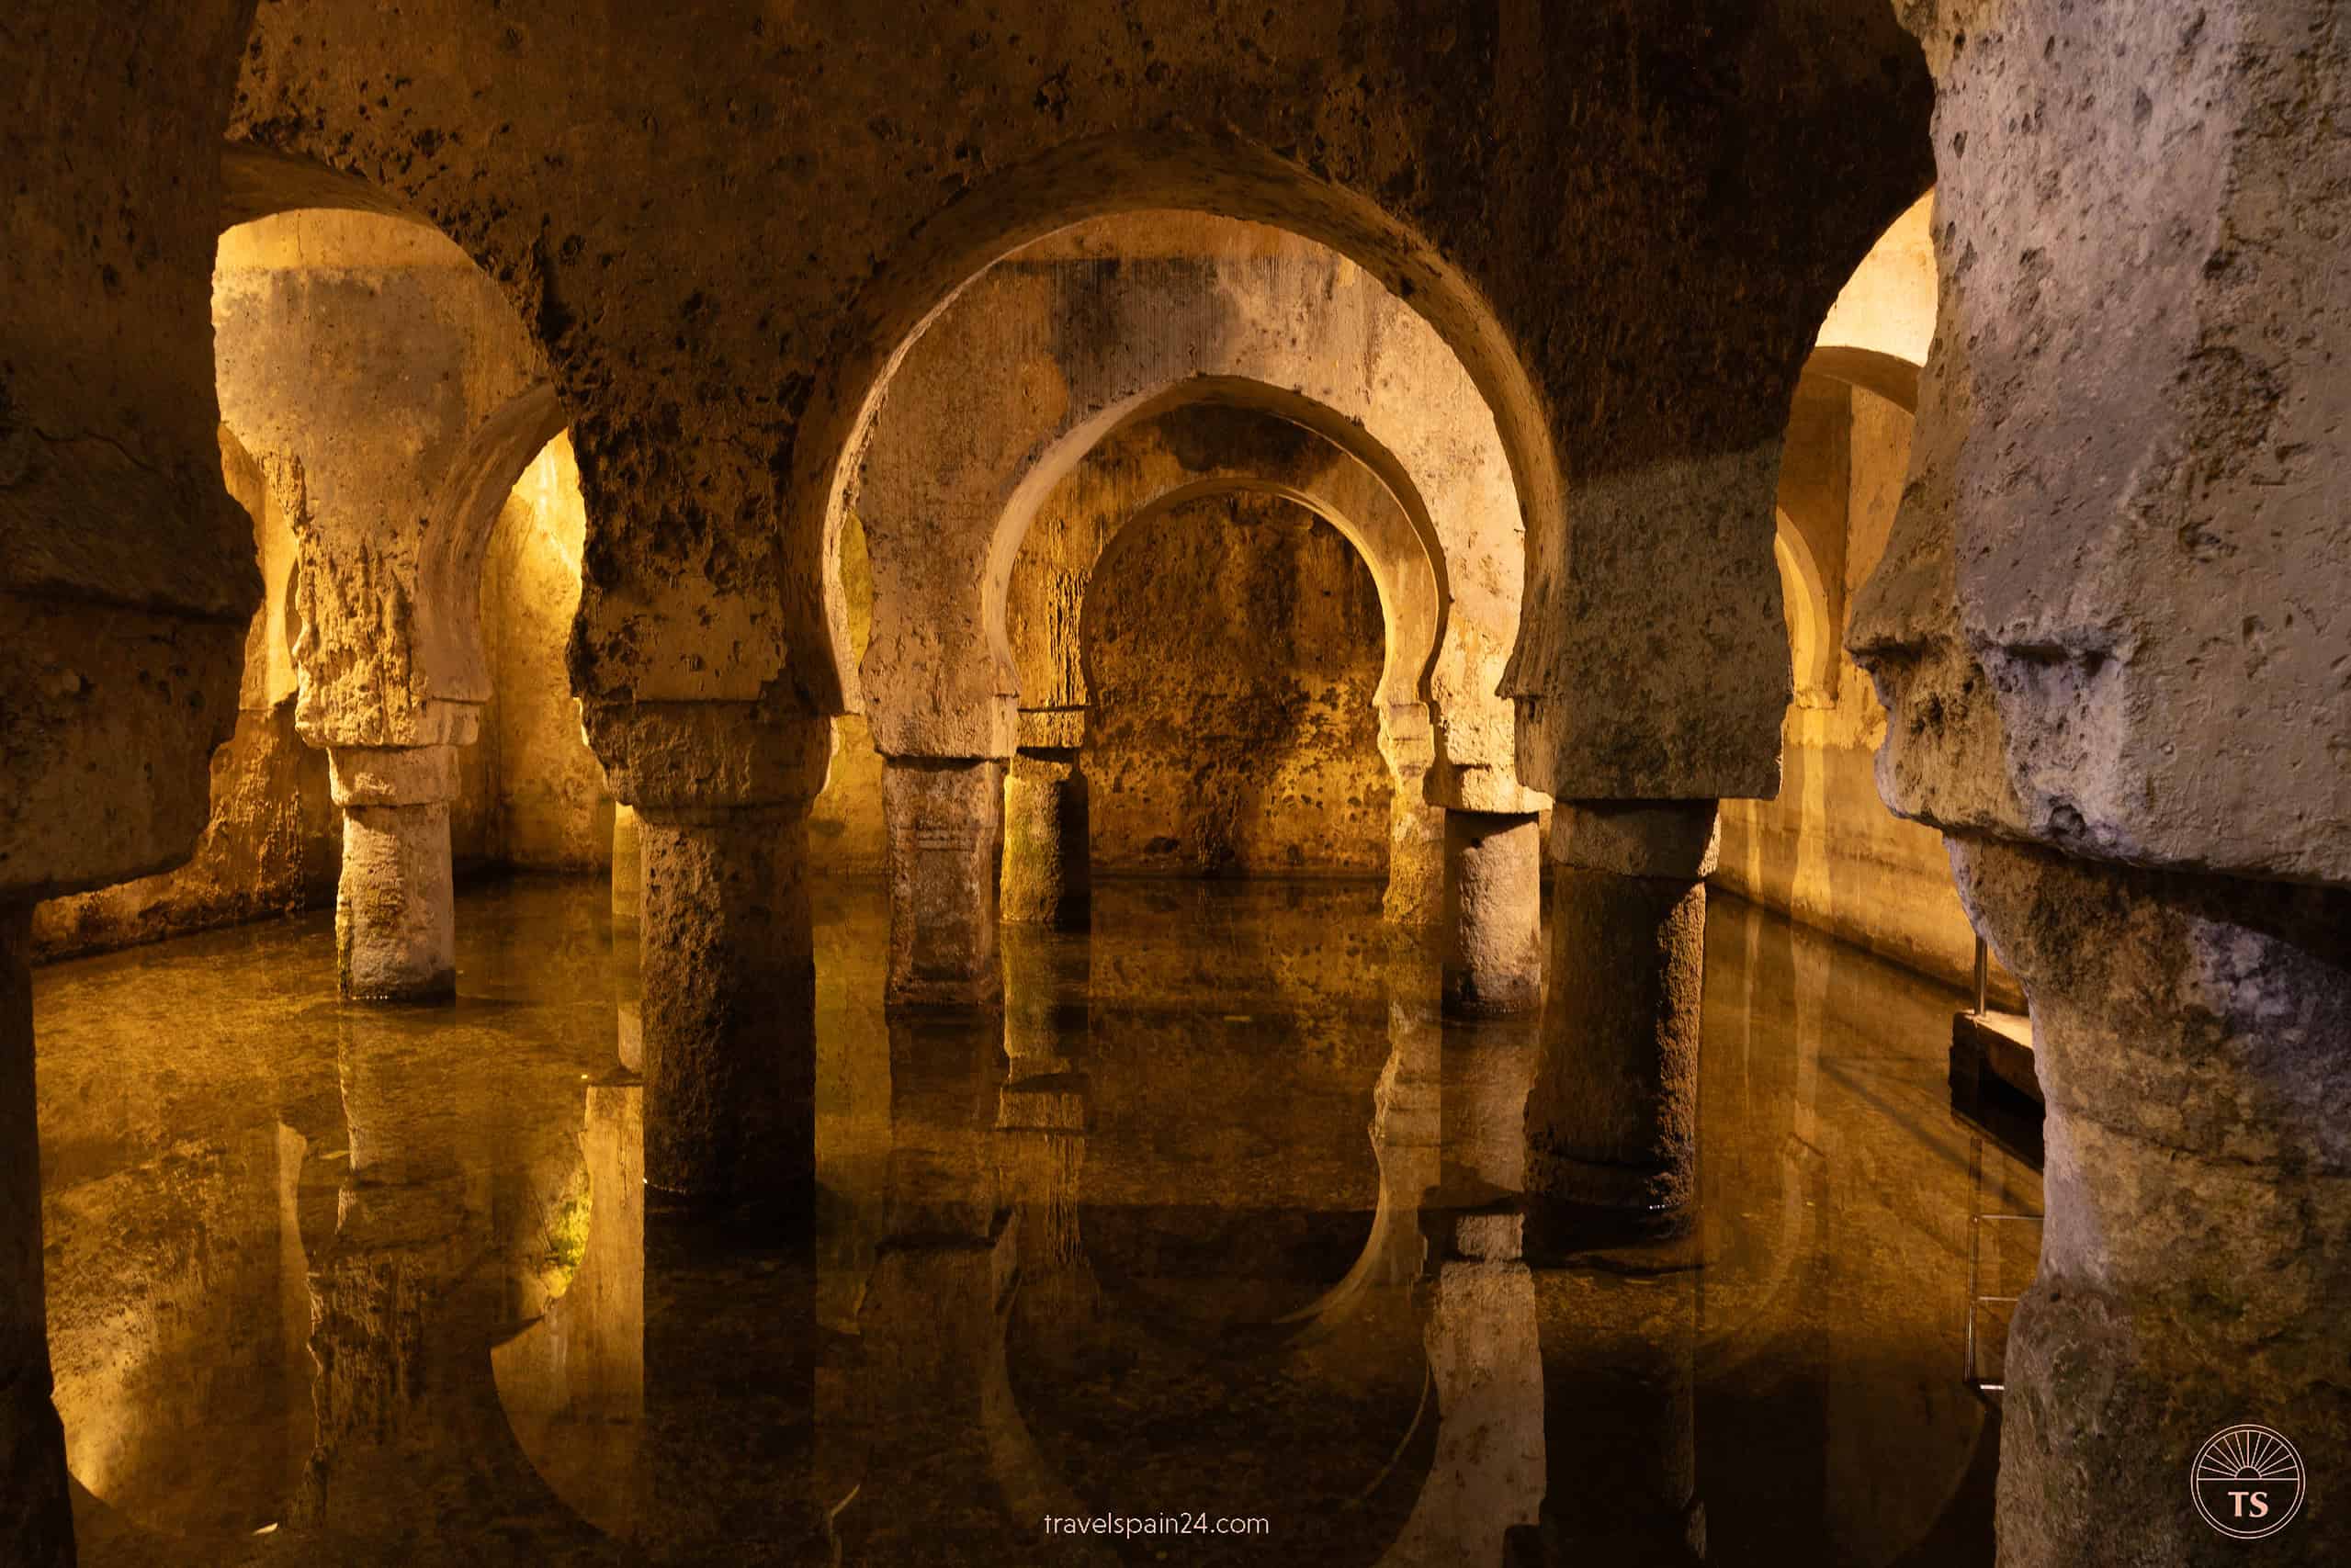 The ancient water basin inside the Caceres Museum, a historic site once crucial for storing water for the city’s residents